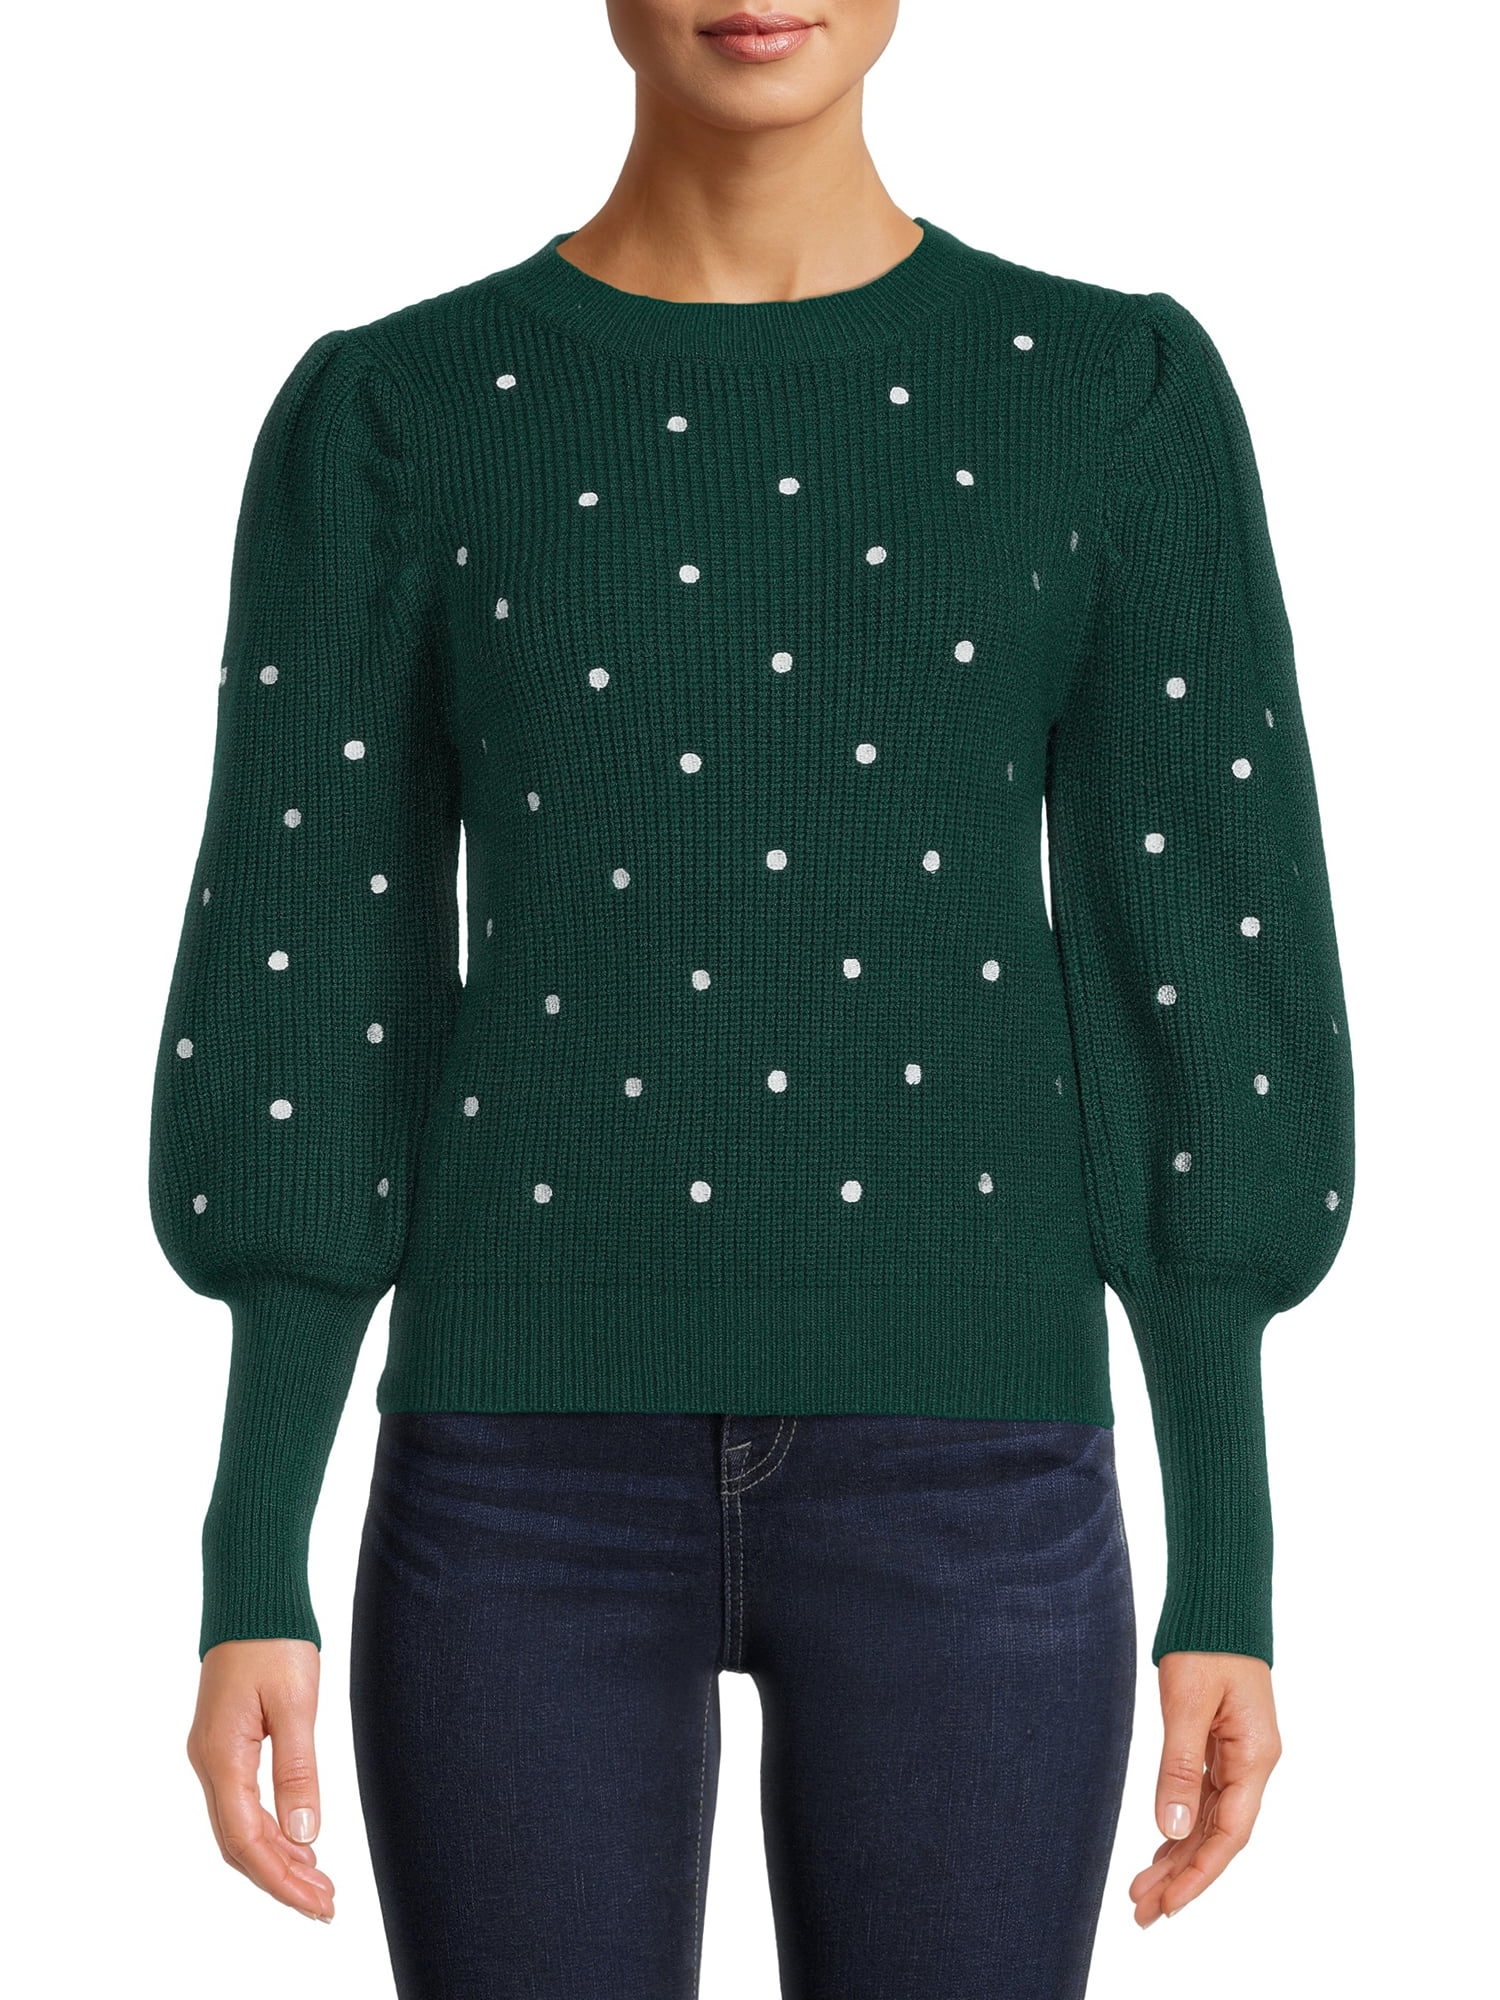 PERCUSSION EMBROIDERED WOOL MIX 3 BUTTON JUMPER 